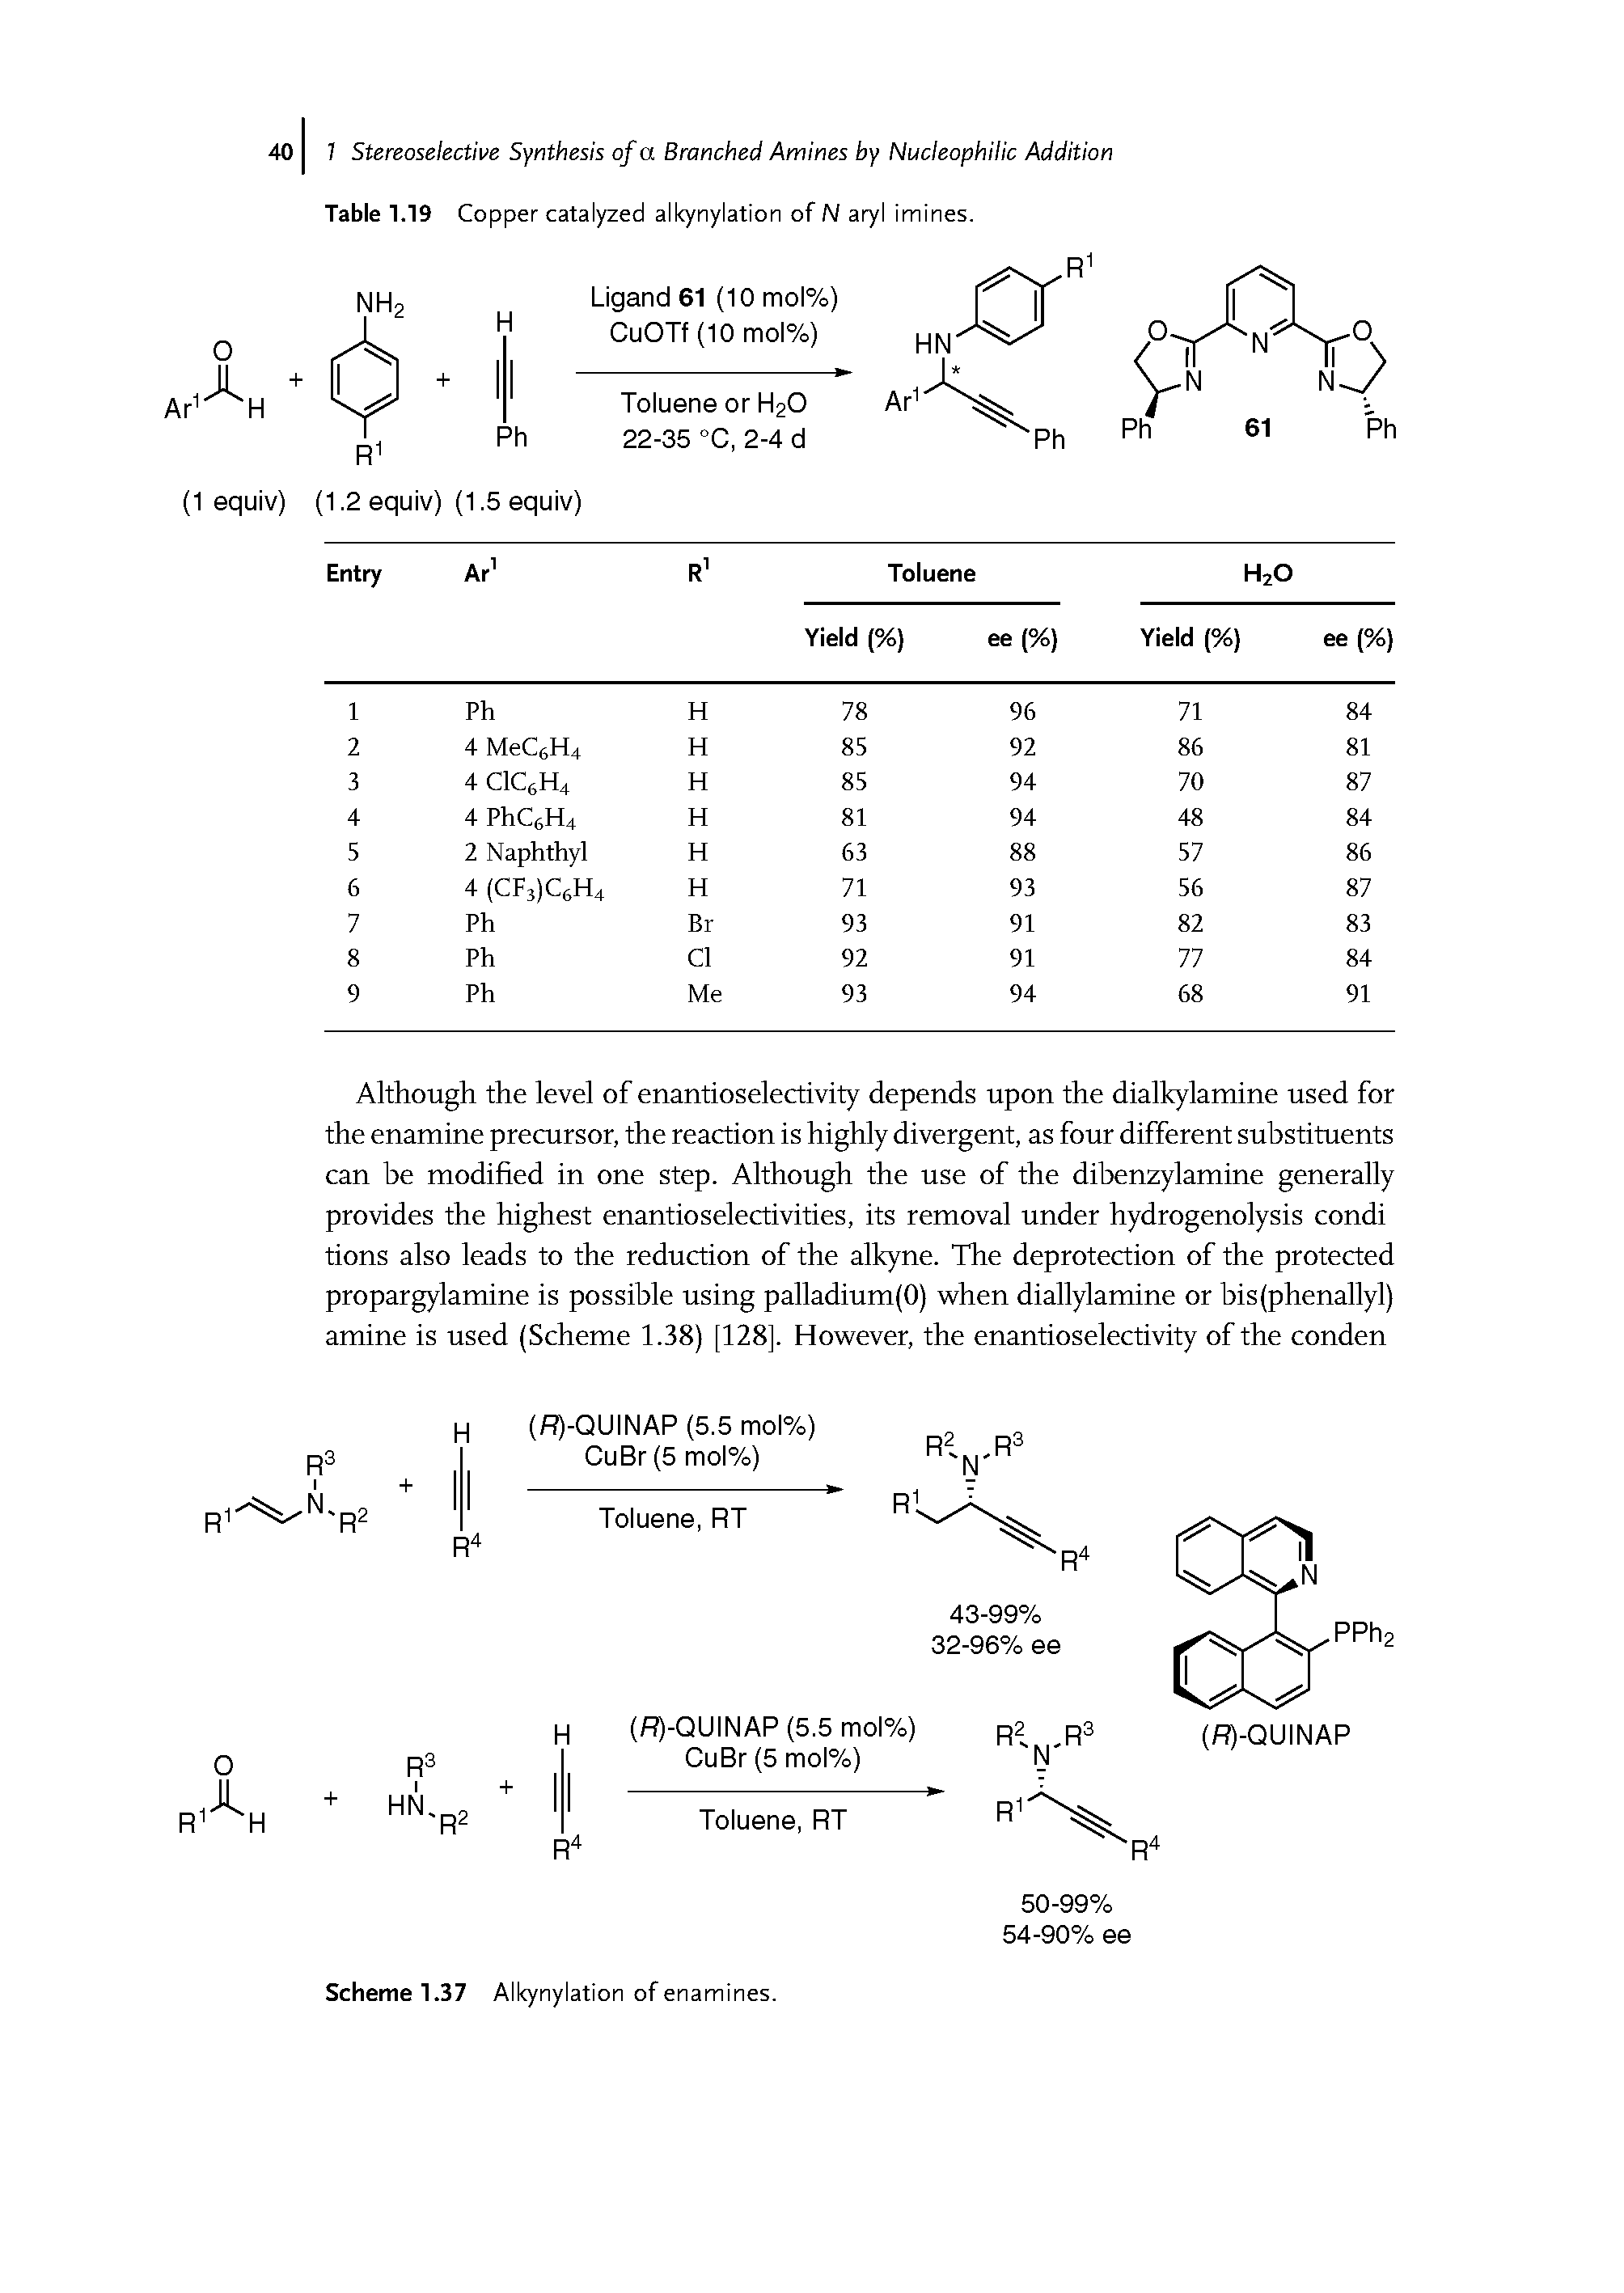 Table 1.19 Copper catalyzed alkynylation of N aryl imines.